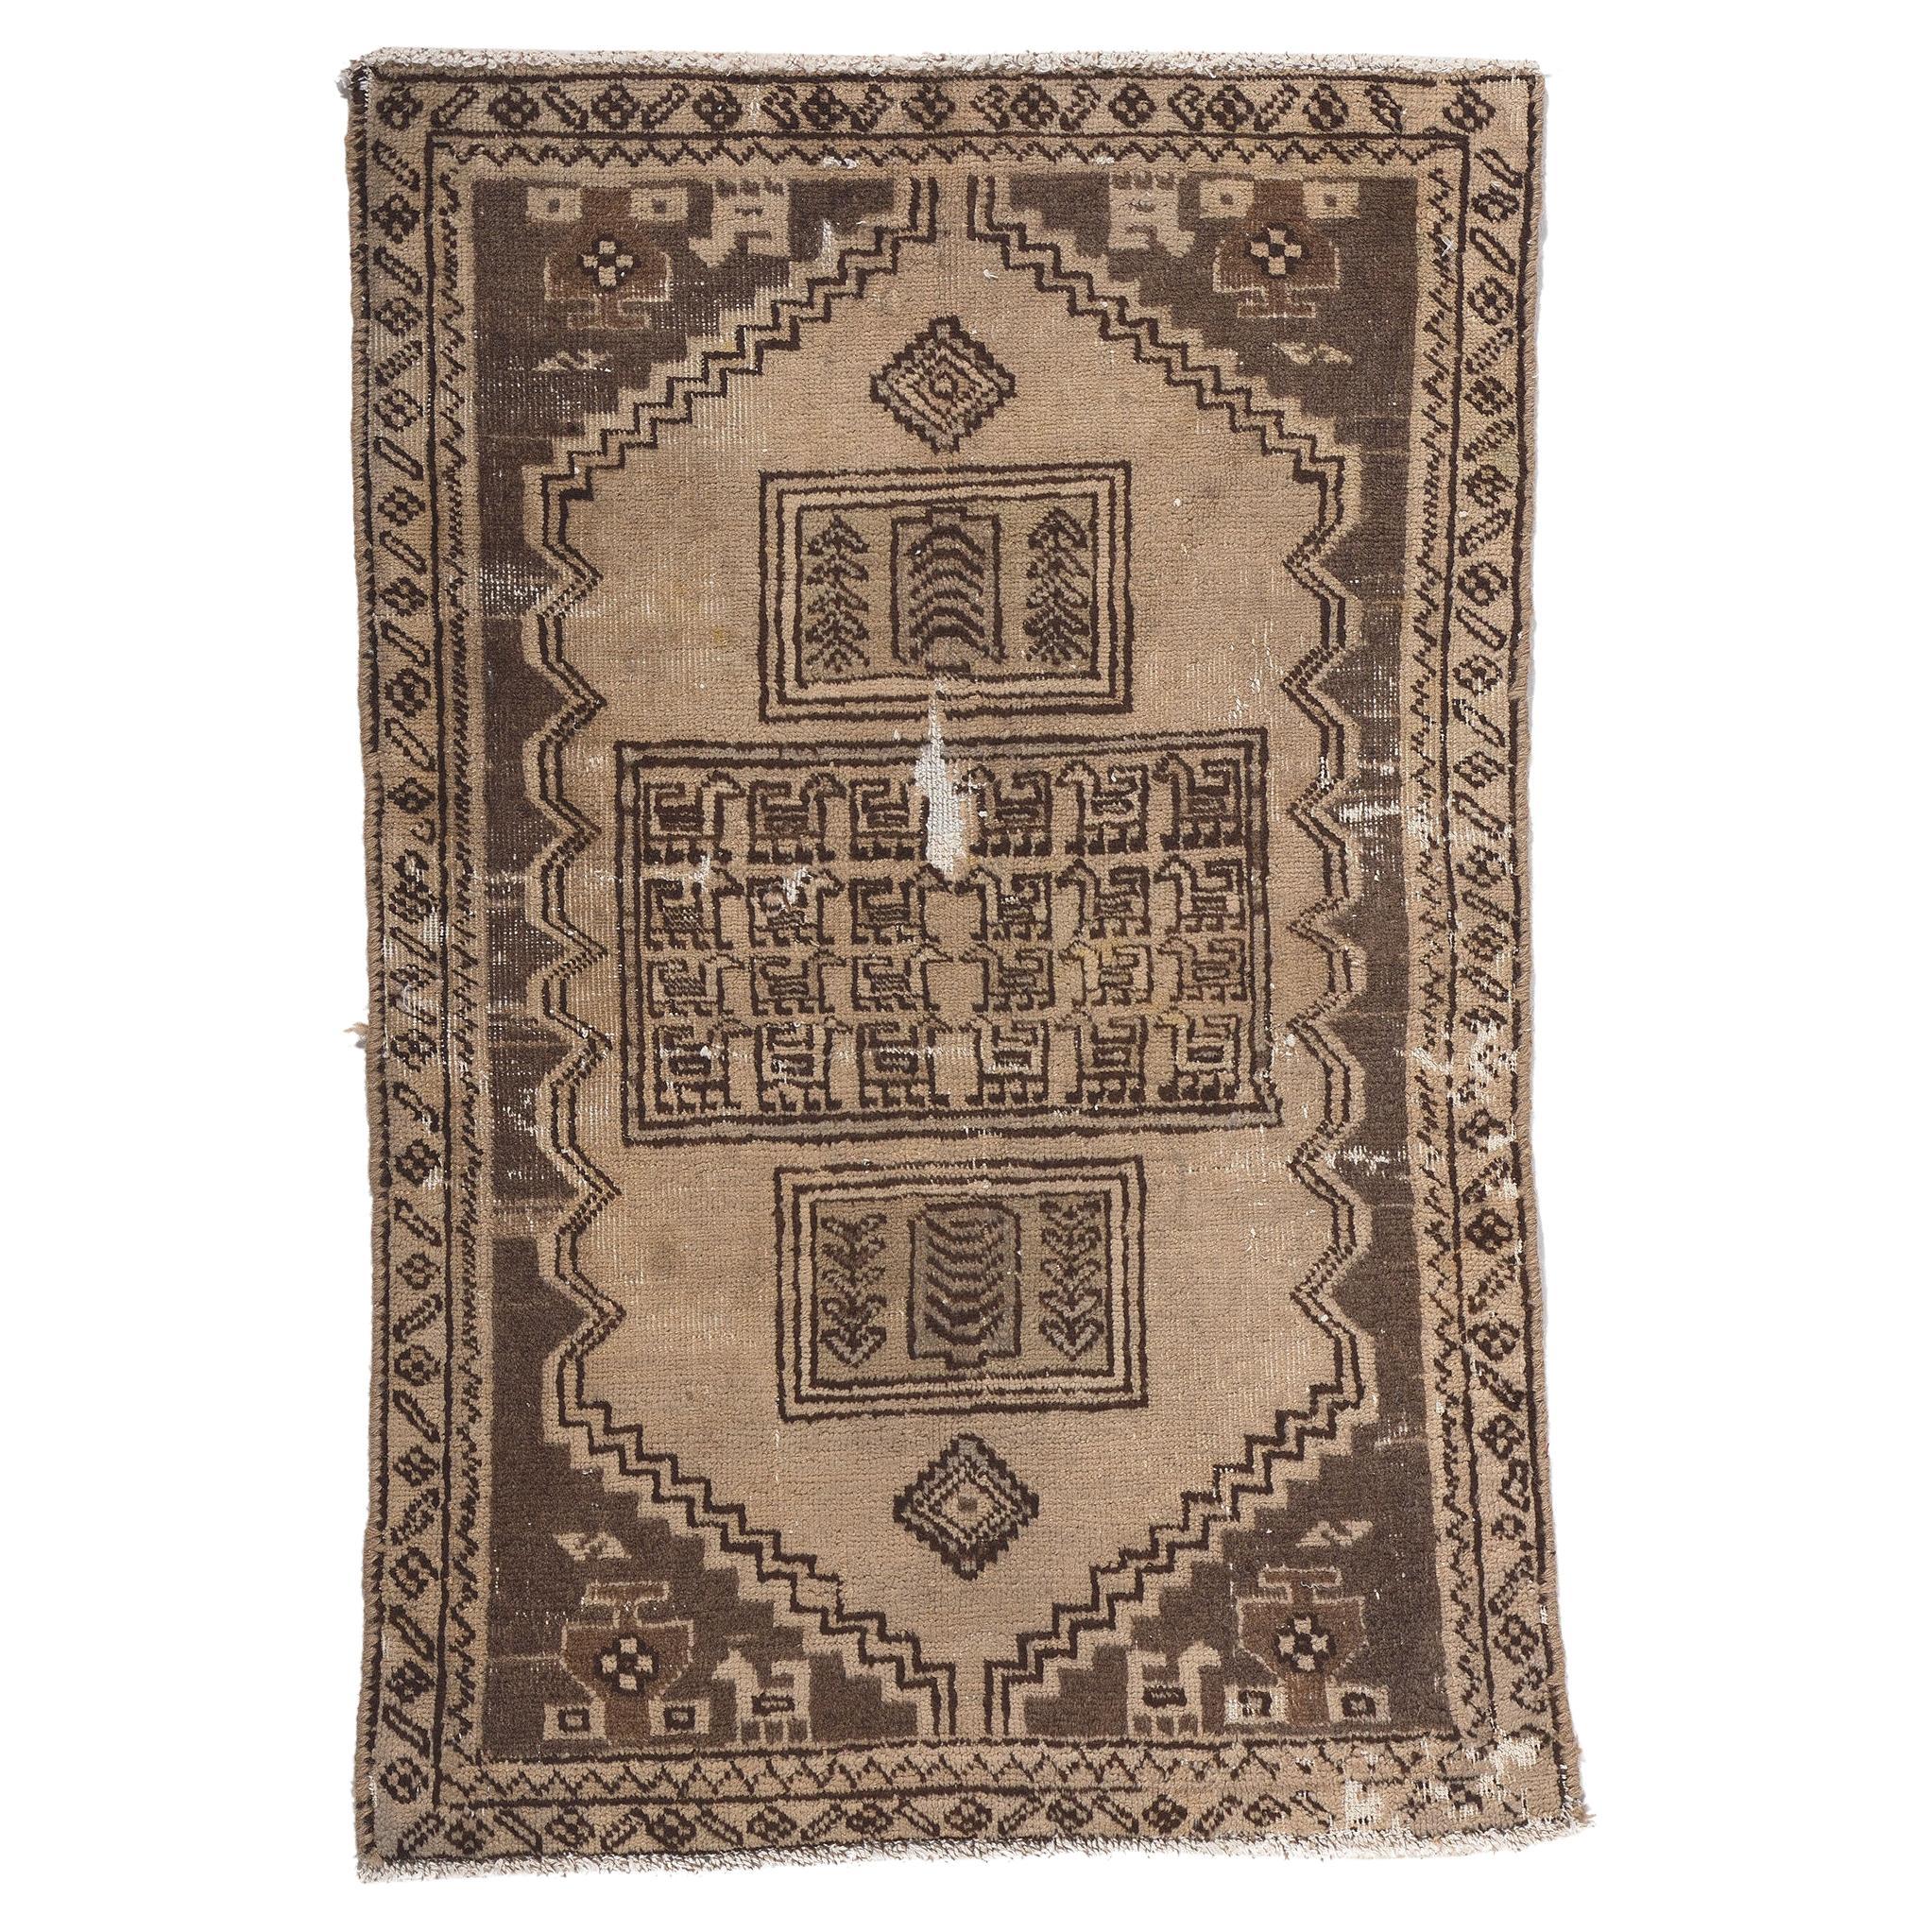 Distressed Neutral Antique Persian Rug, Nomadic Charm Meets Rustic Finesse